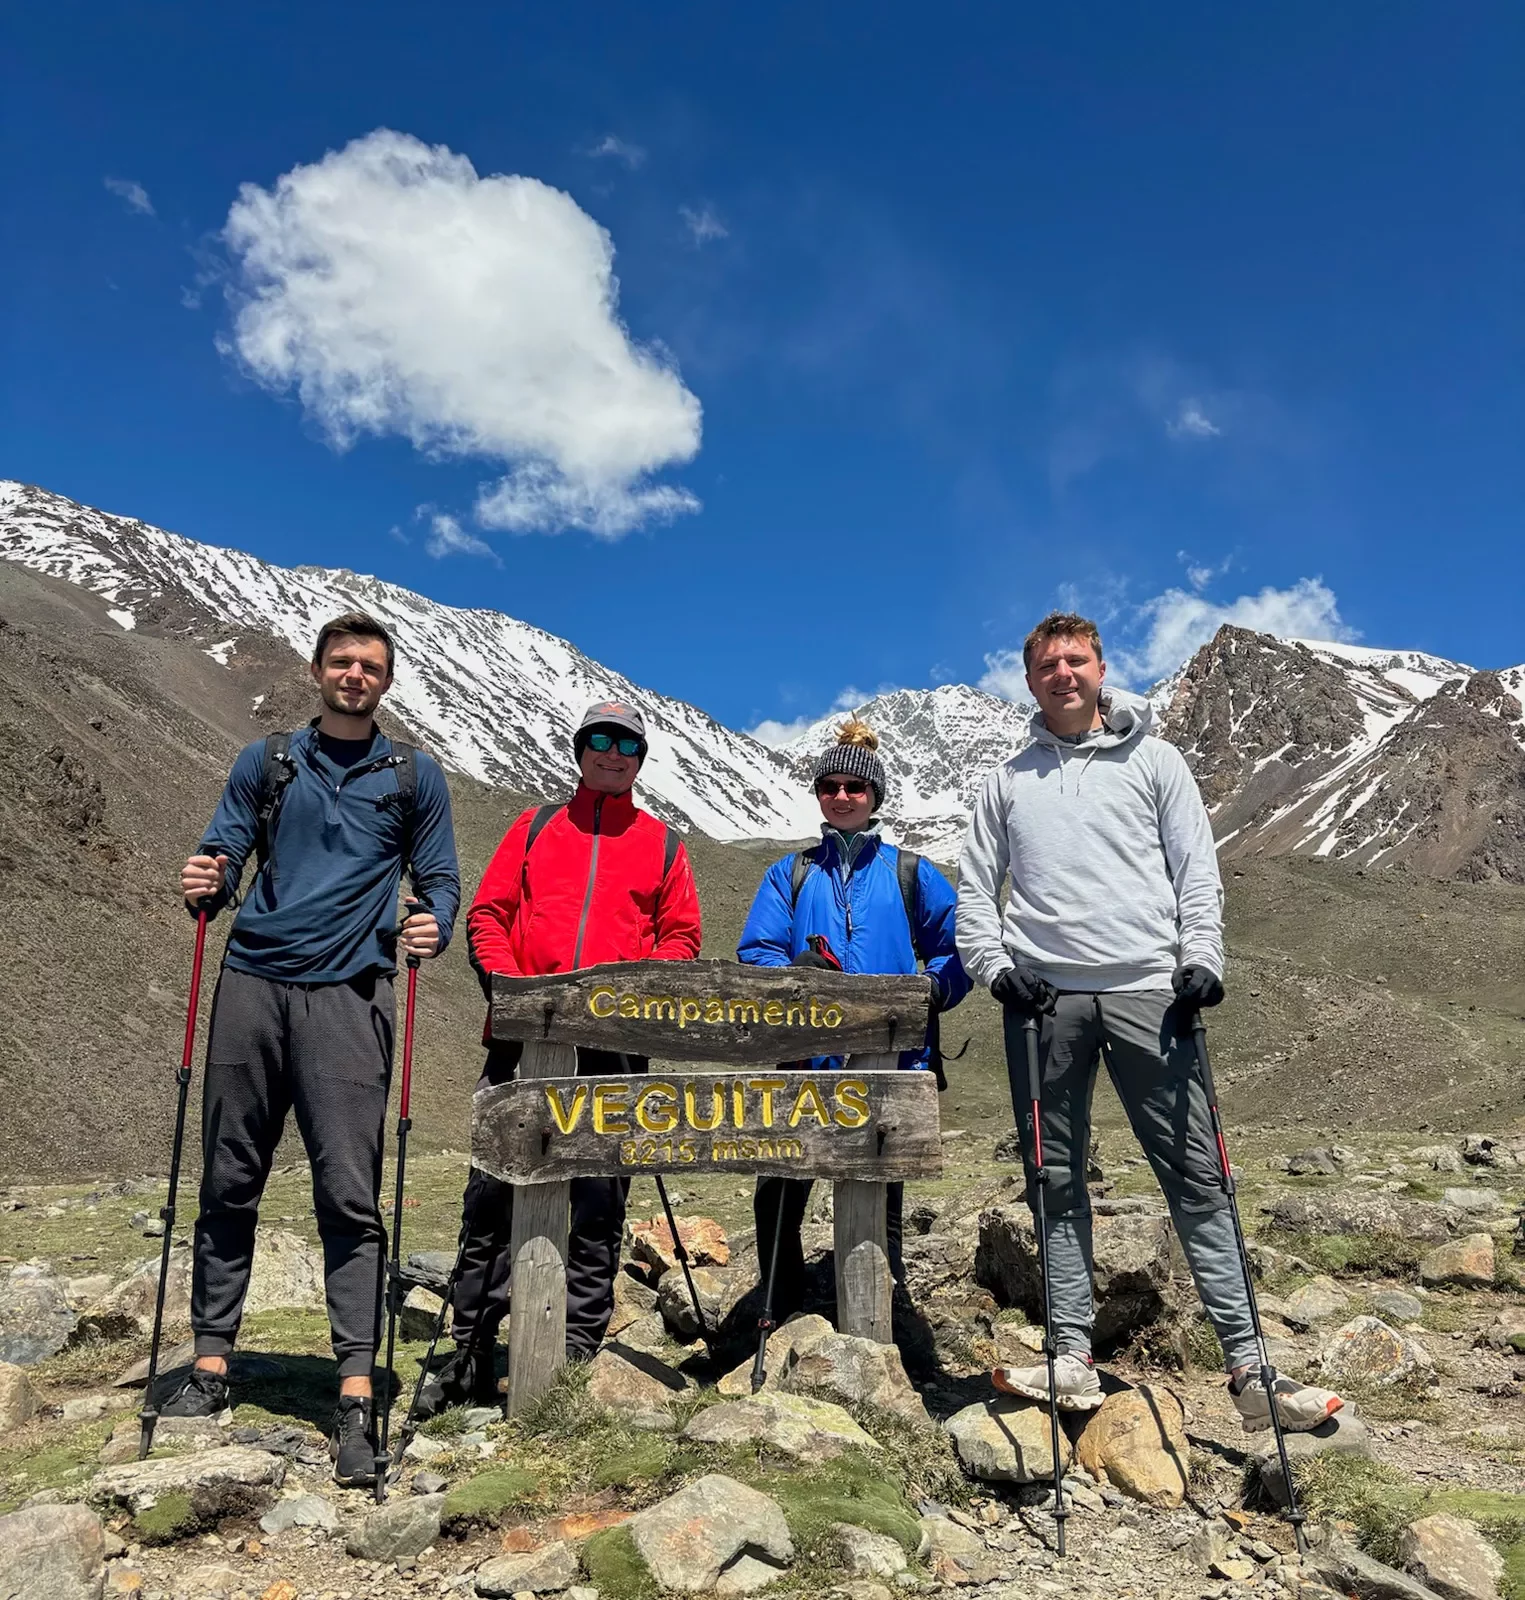 hikers pose with a sign